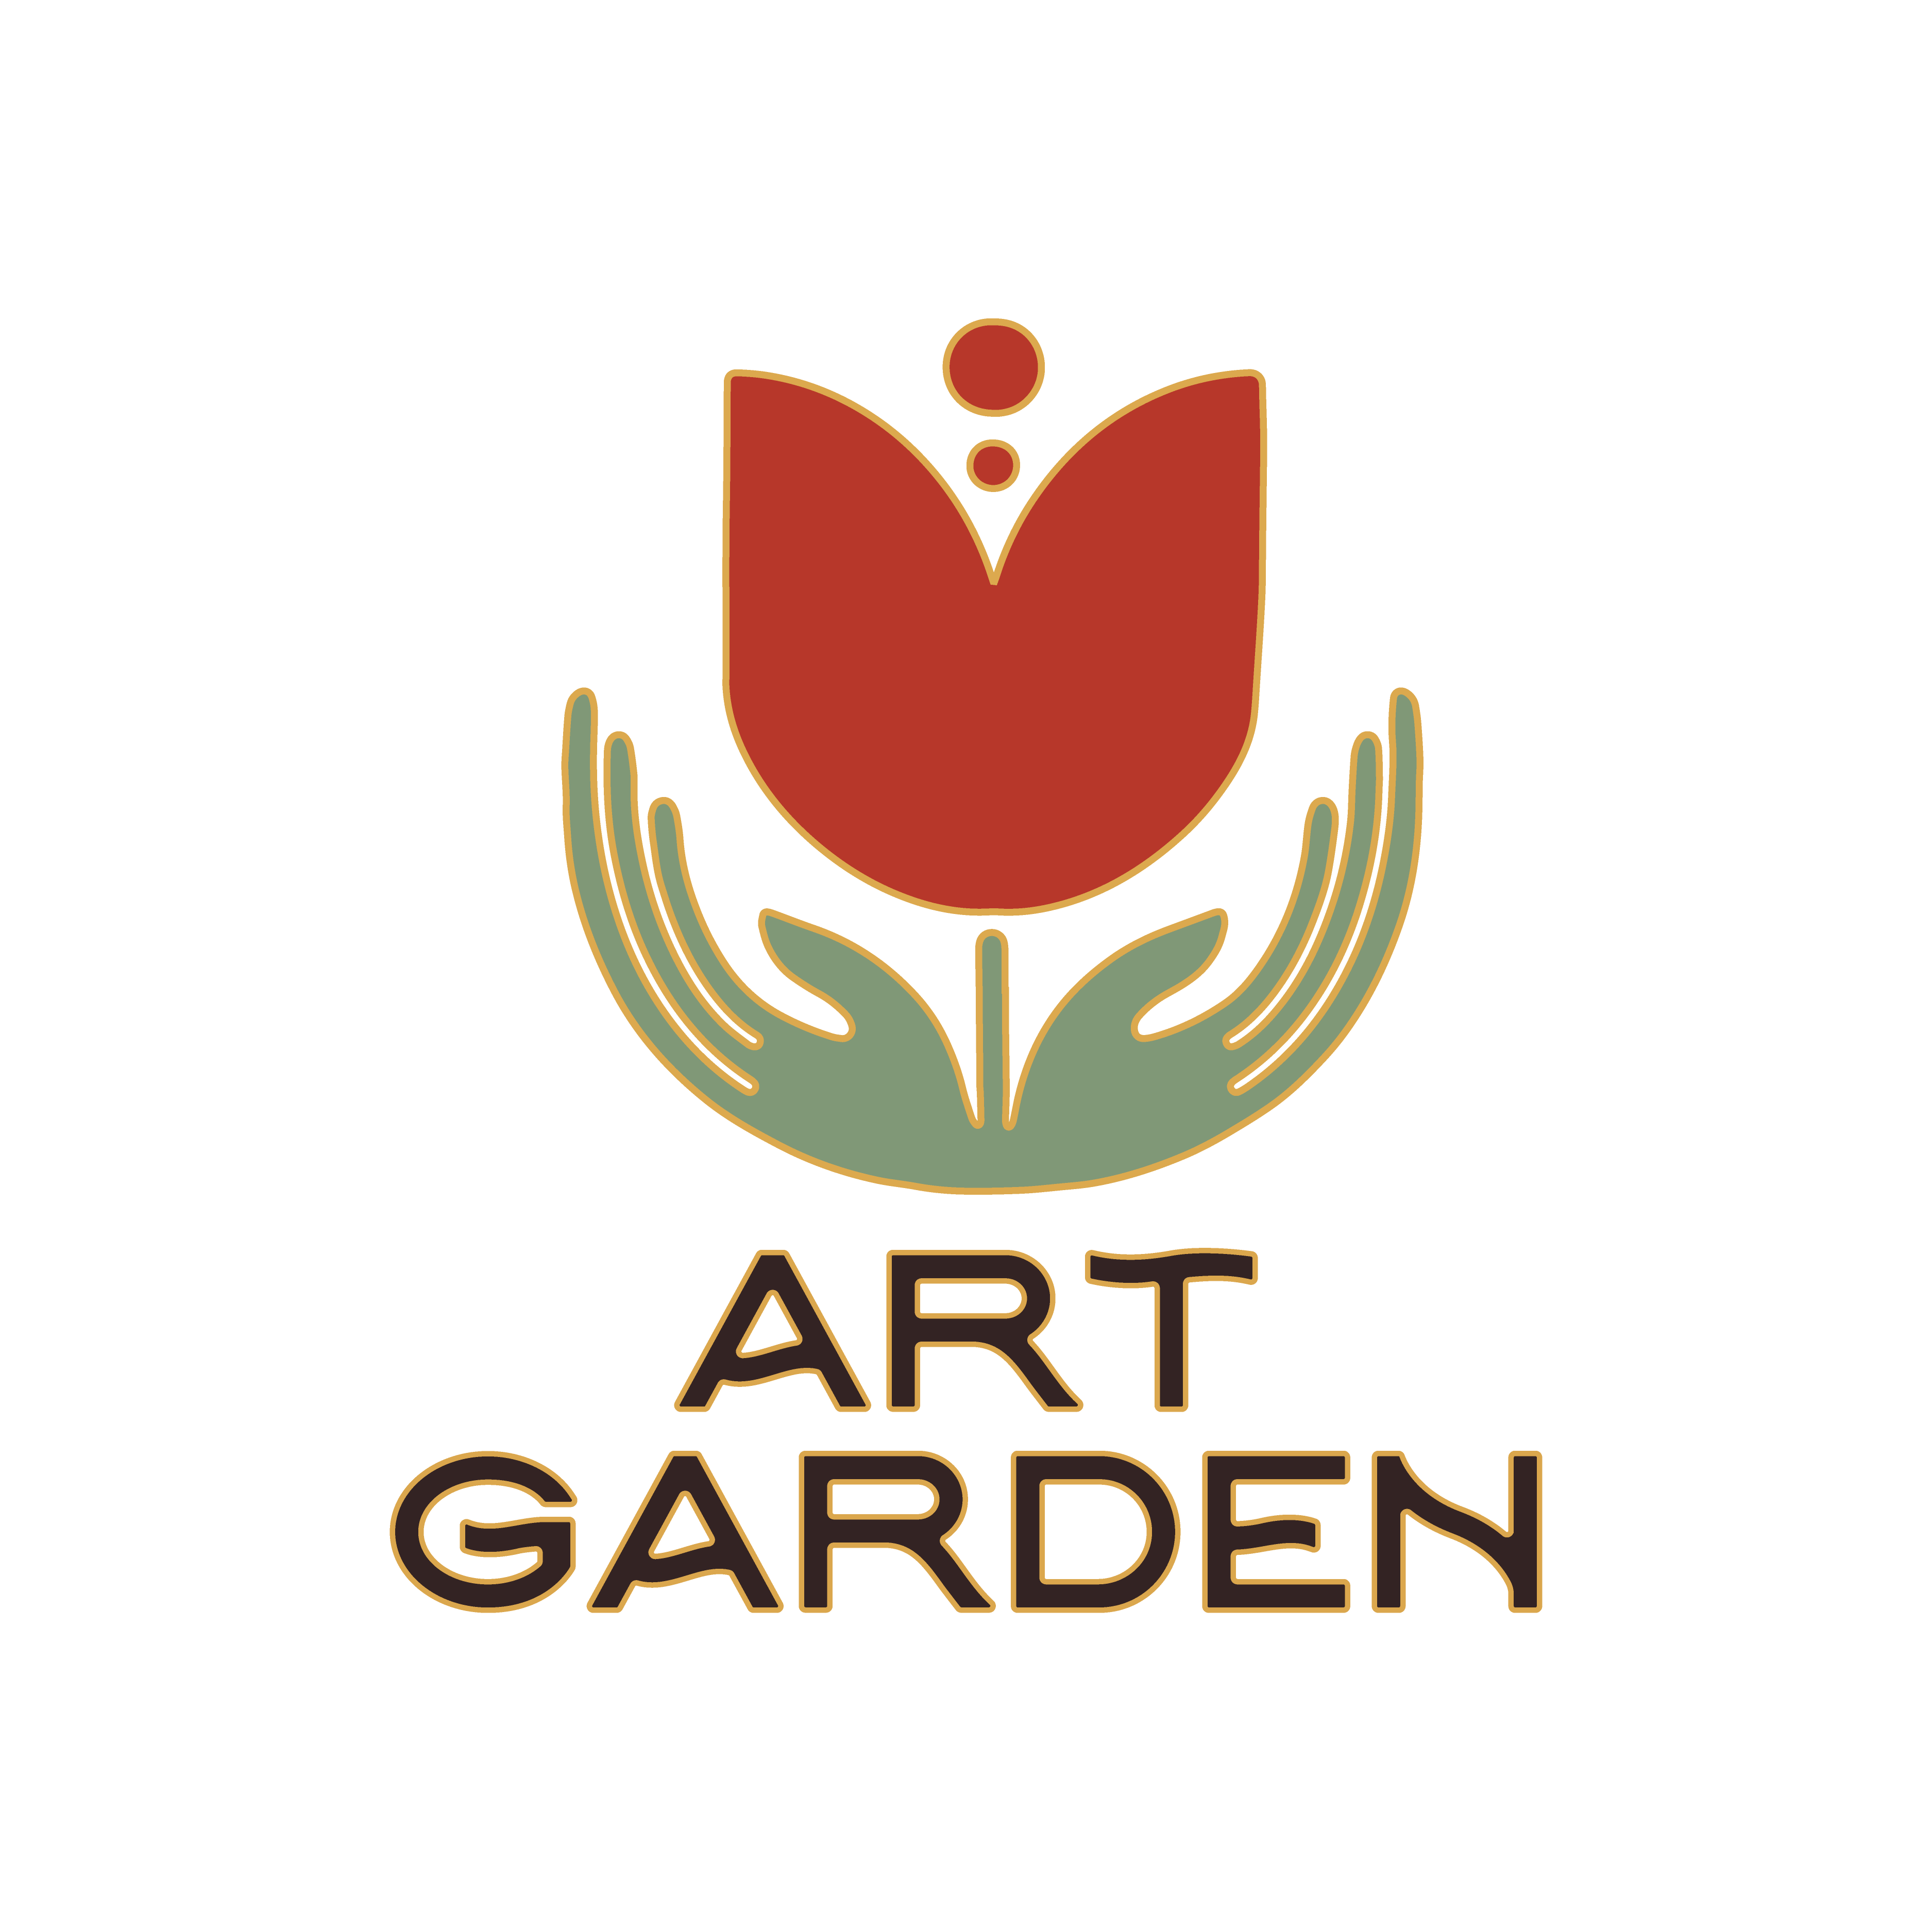 Art Garden logo design by logo designer Logarhythm Creative for your inspiration and for the worlds largest logo competition